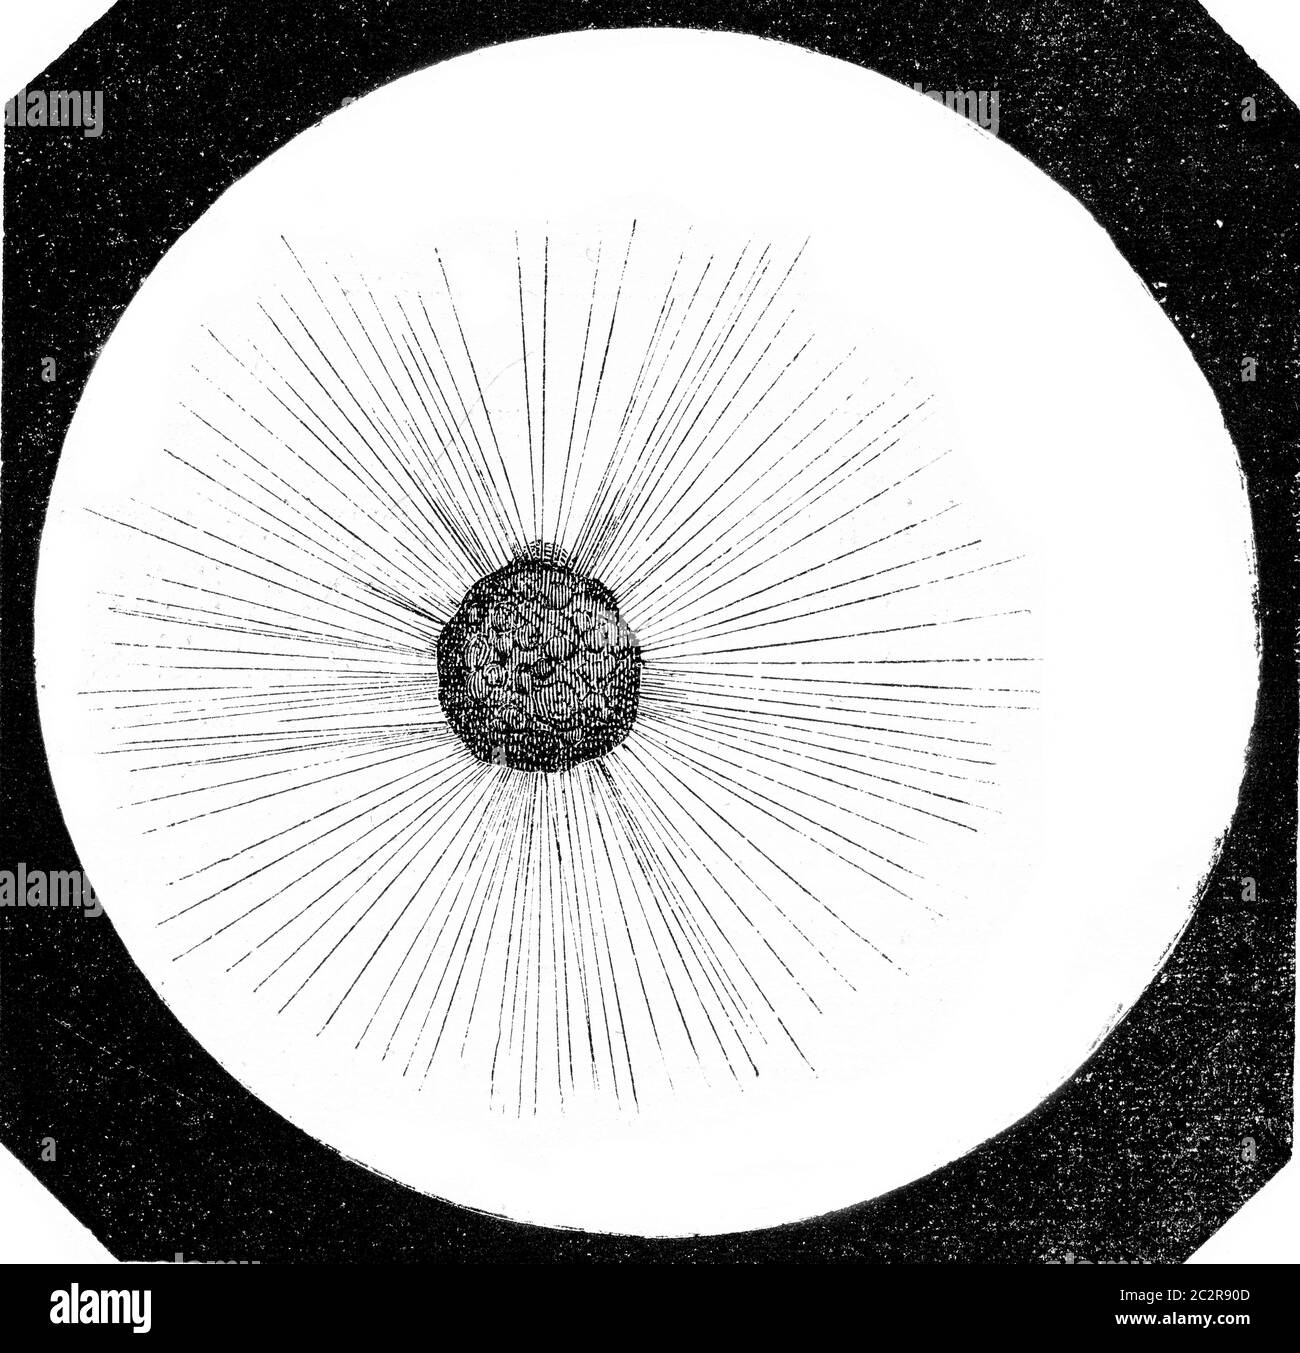 Actinophrys sun, Actinophrys ground, magnified 250 times, vintage engraved illustration. Magasin Pittoresque 1873. Stock Photo